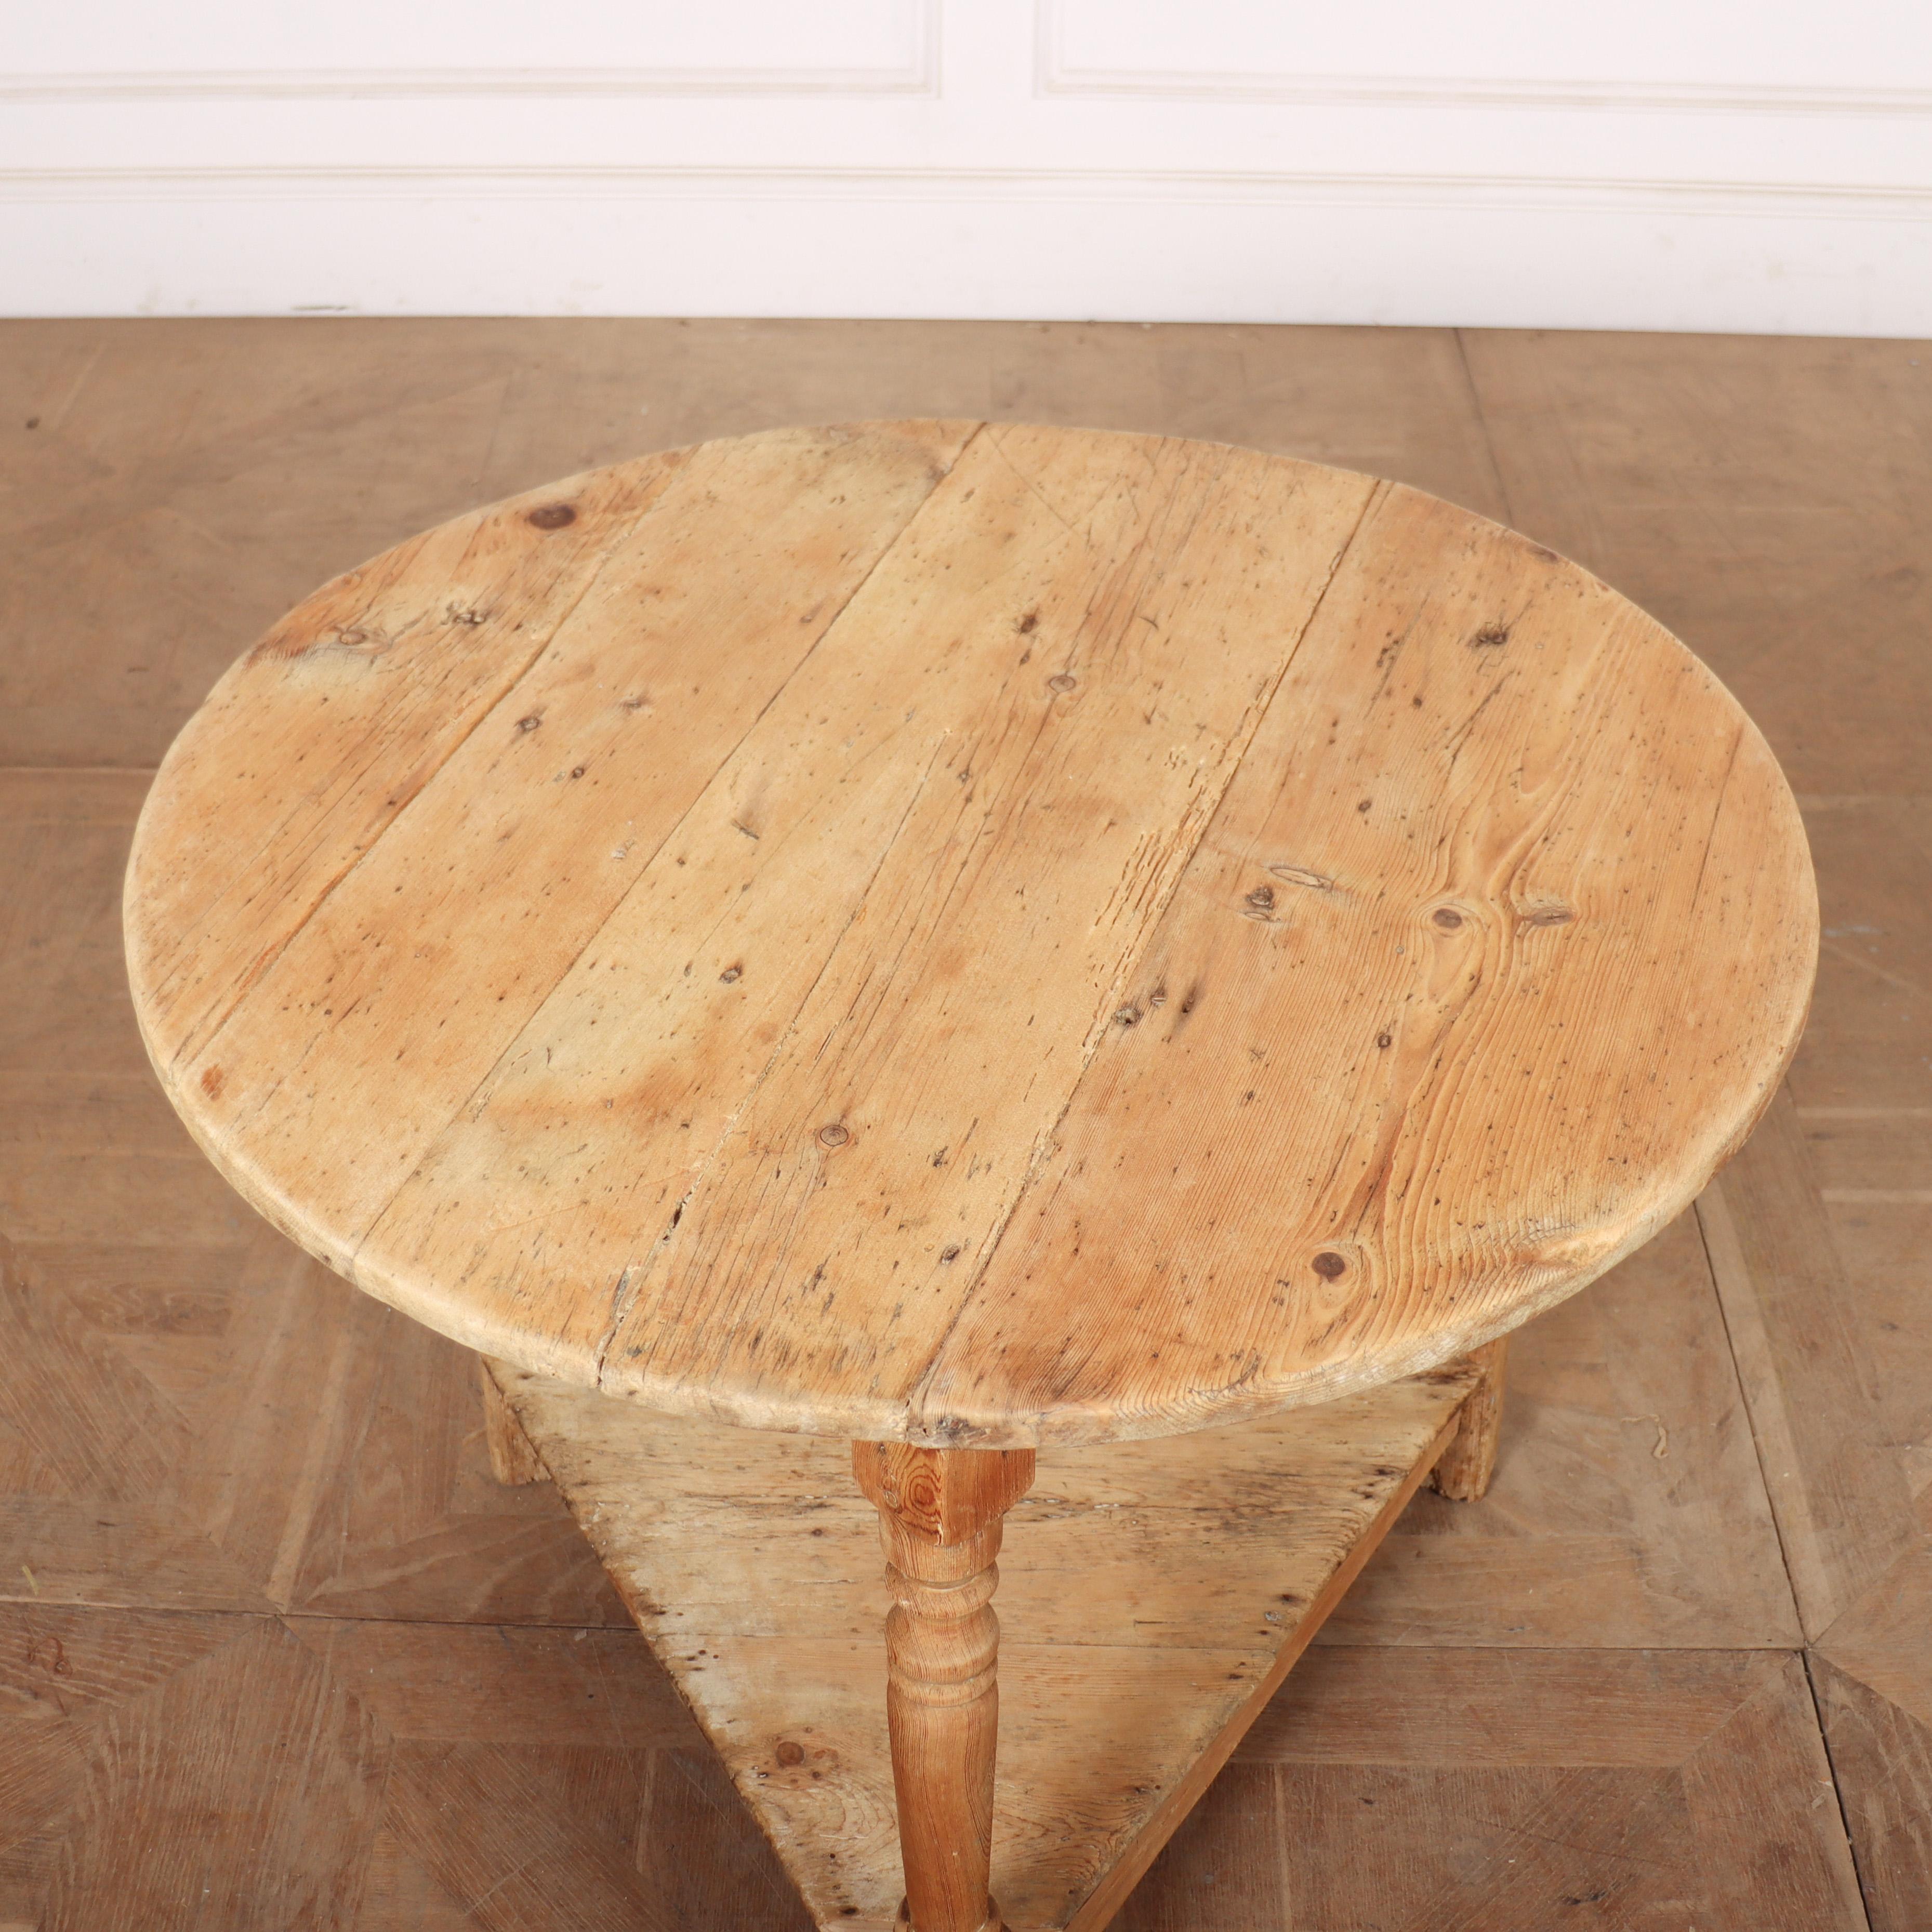 Good 19th C scrubbed pine cricket table. 1850.

Reference: 8275

Dimensions
24.5 inches (62 cms) High
31.5 inches (80 cms) Diameter